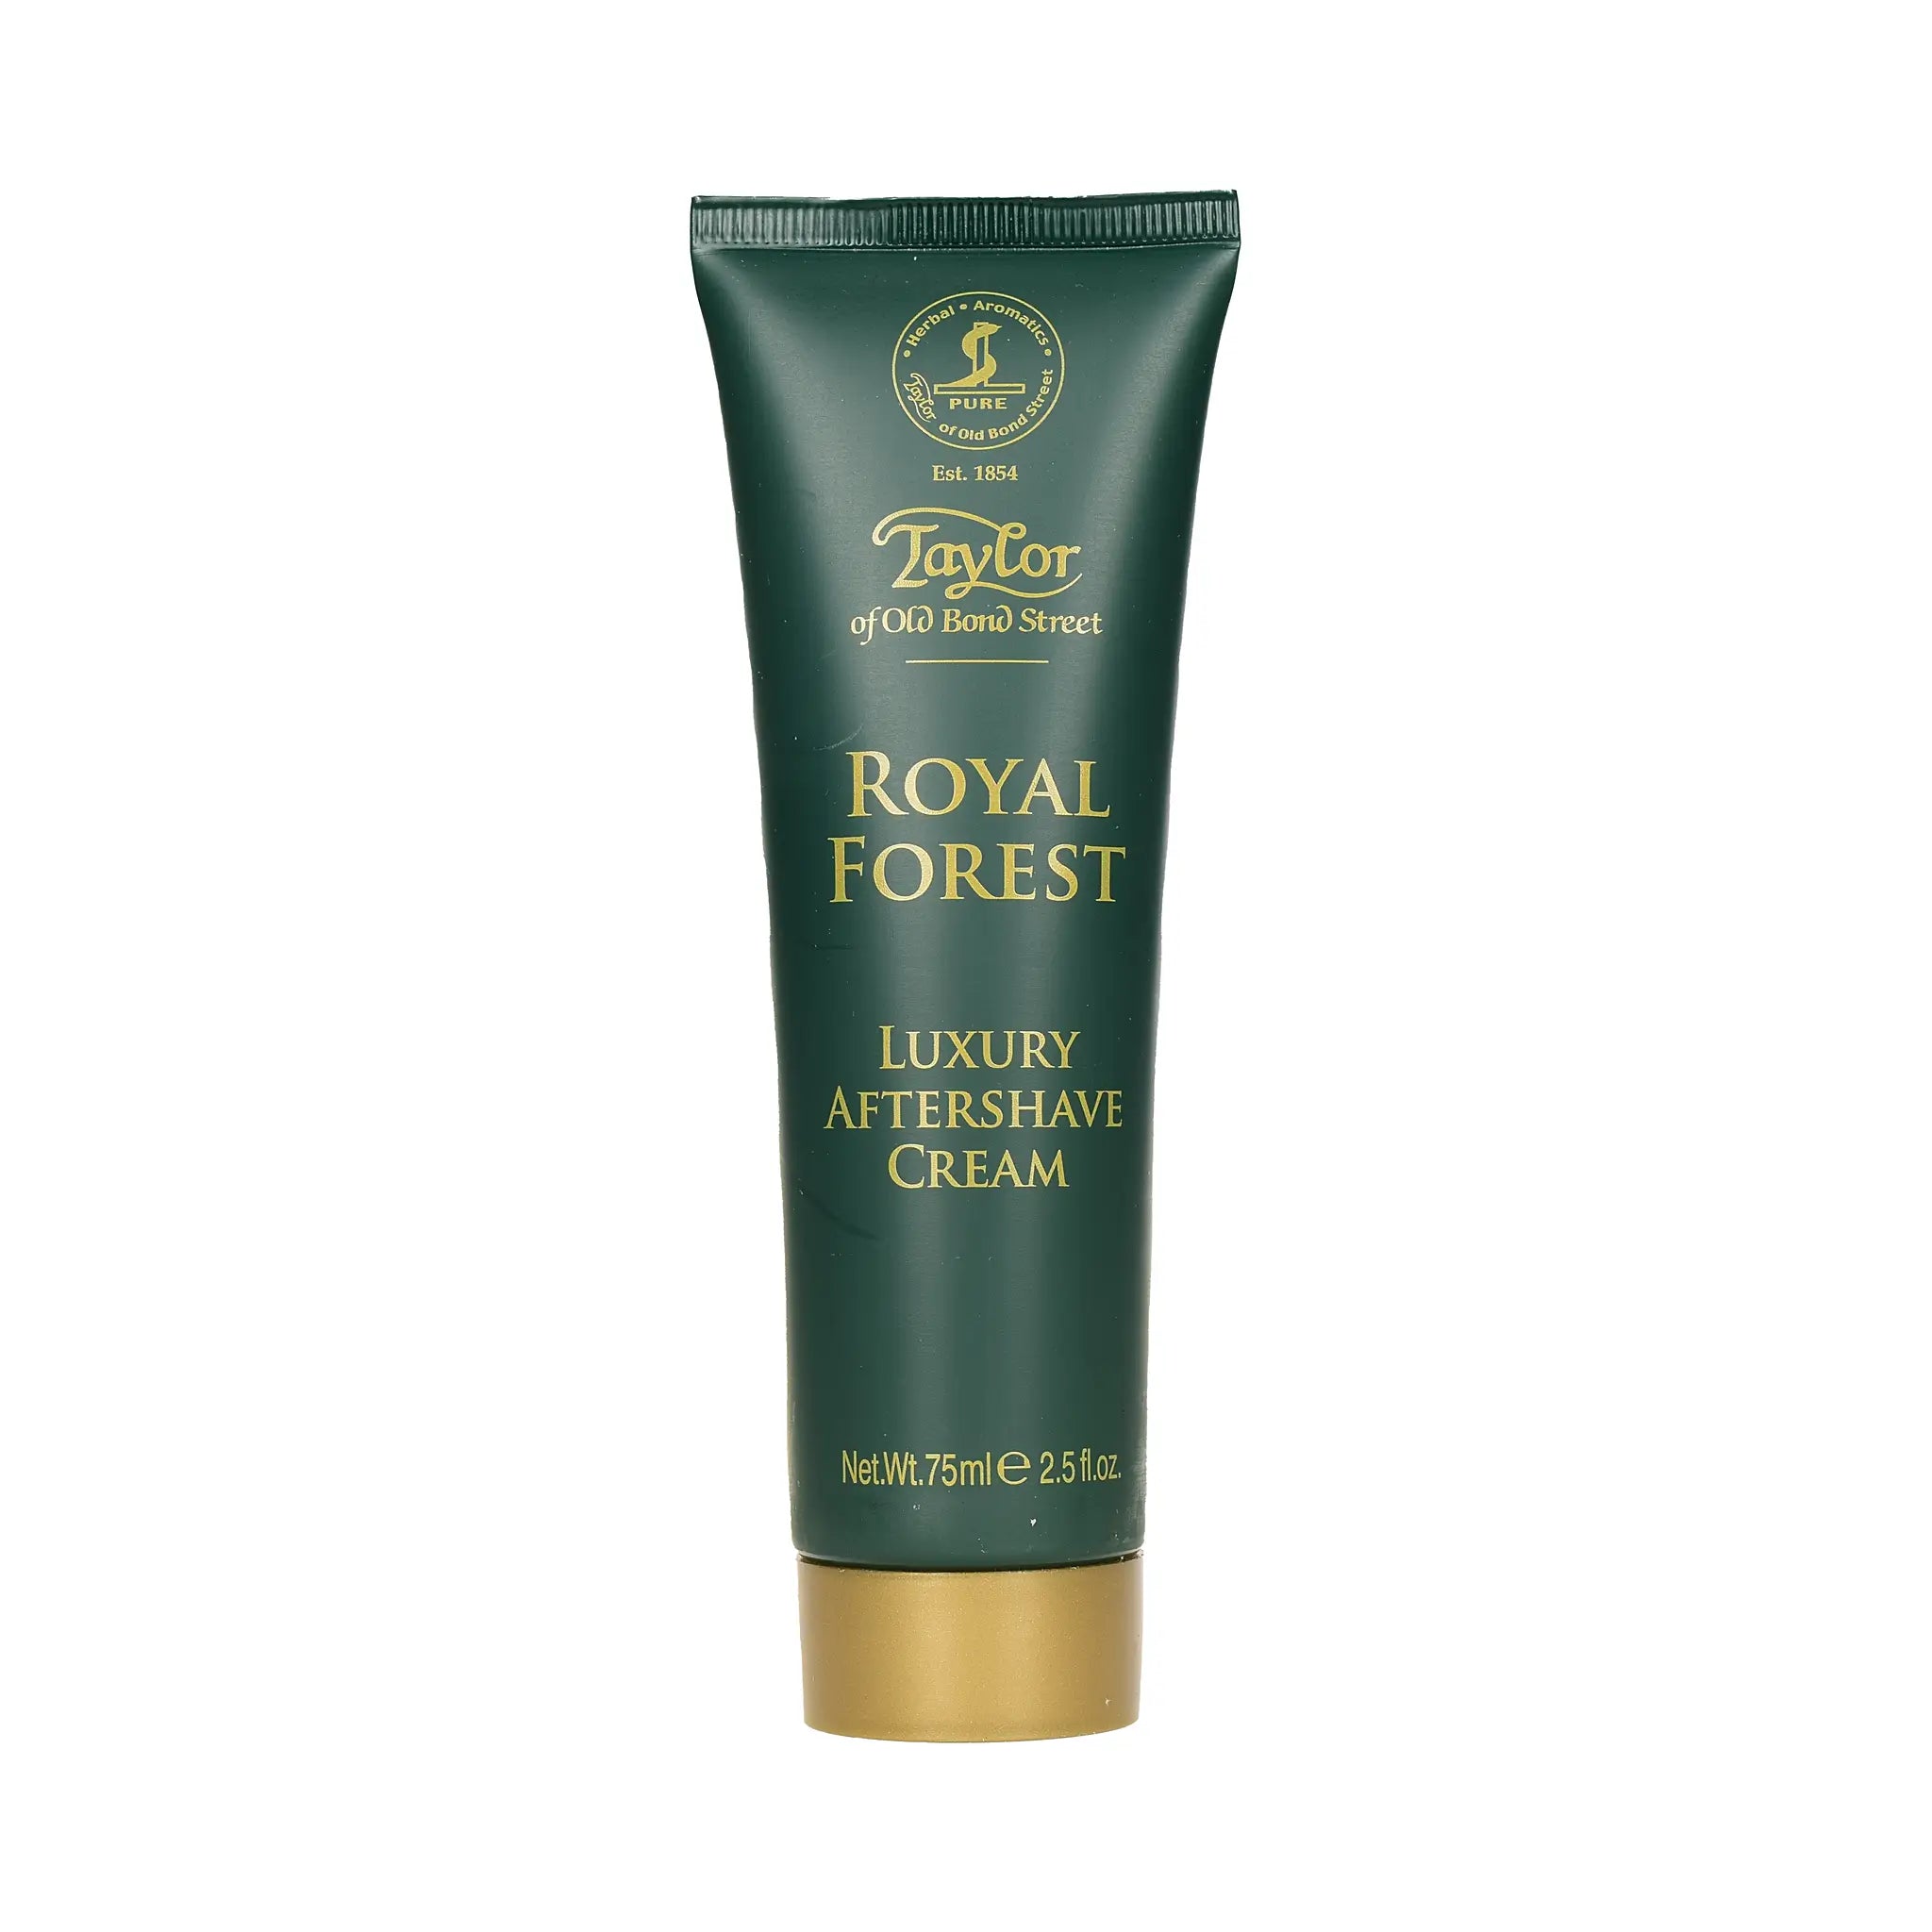 BOND OF ml Tonsus Cream, Aftershave TAYLOR STREET 75 Royal Forest OLD –